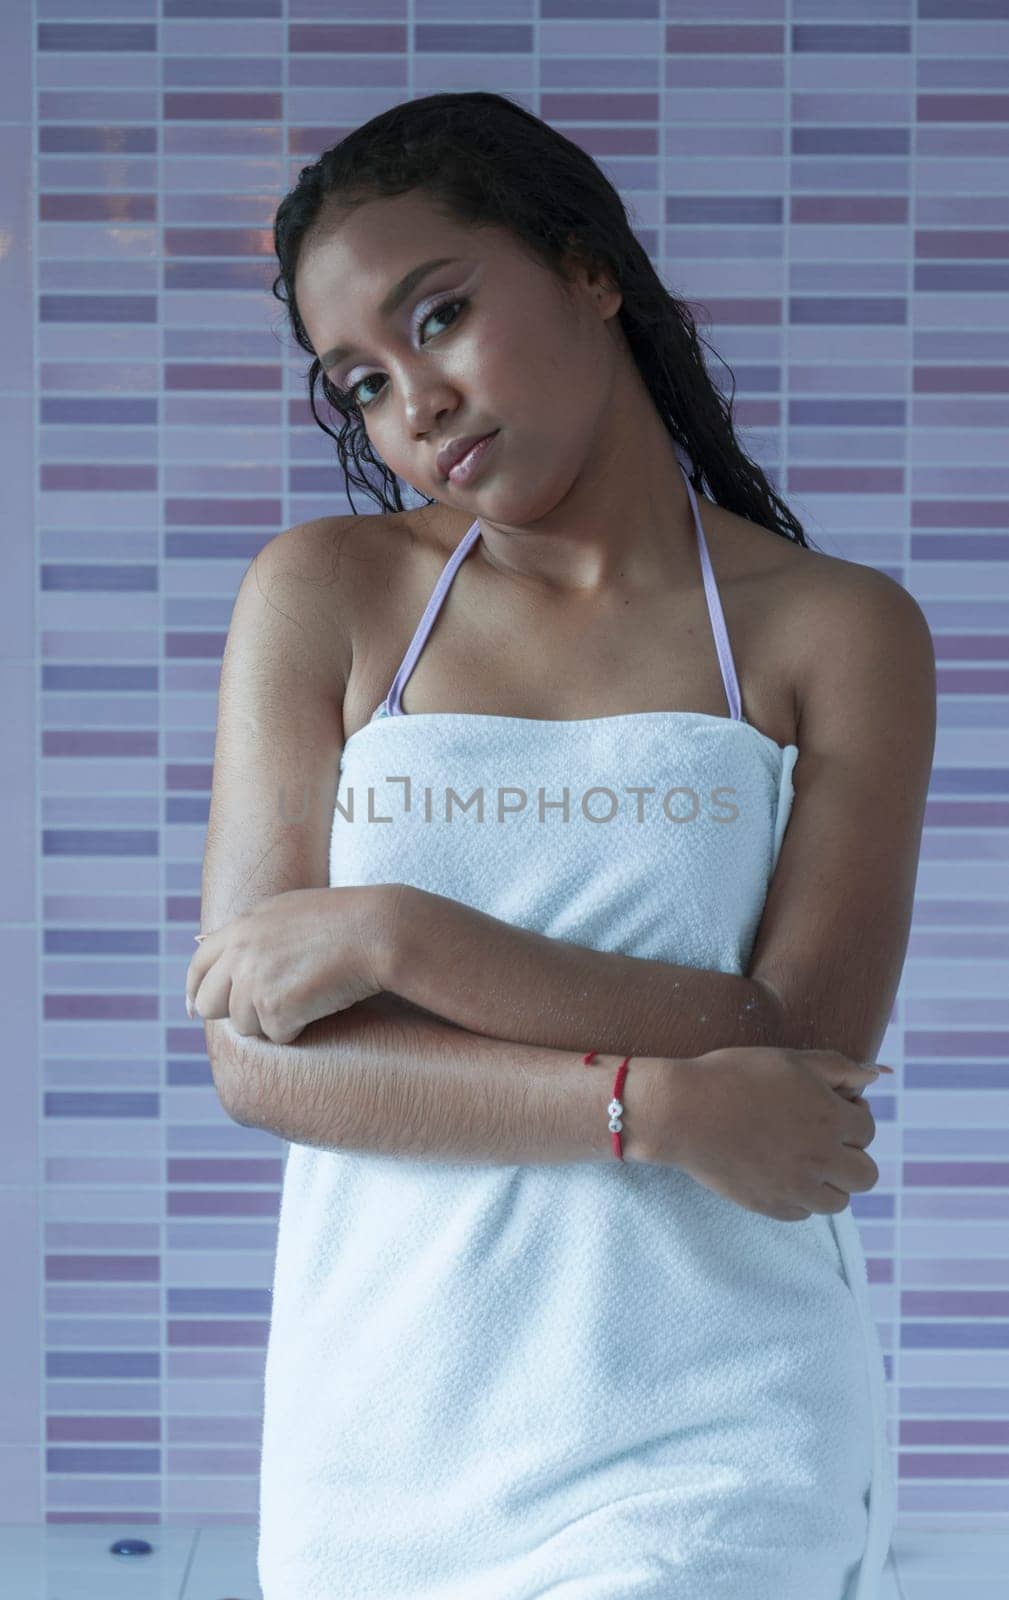 Latina GIRL fresh out of the bathroom relaxing with a white towel and looking at the camera by Raulmartin